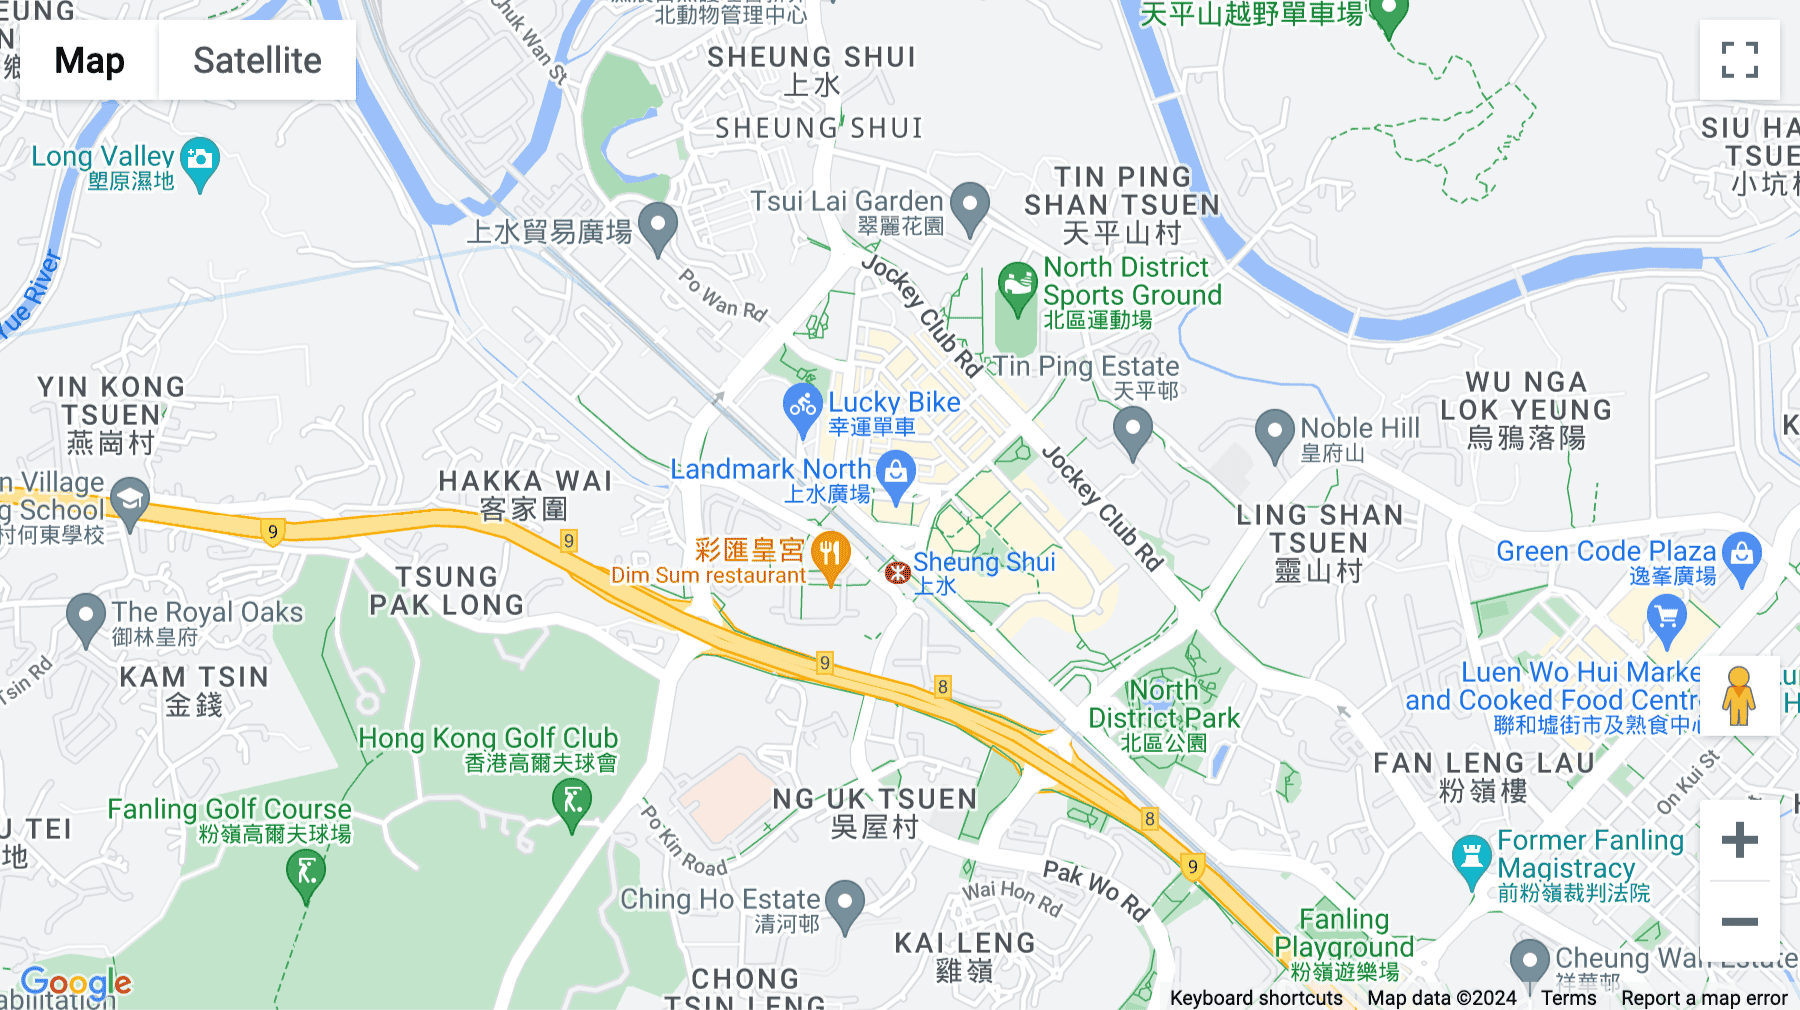 Click for interative map of 16/F Landmark North, 39 Lung Sum Avenue, Sheung Shui New Territories, Hong Kong